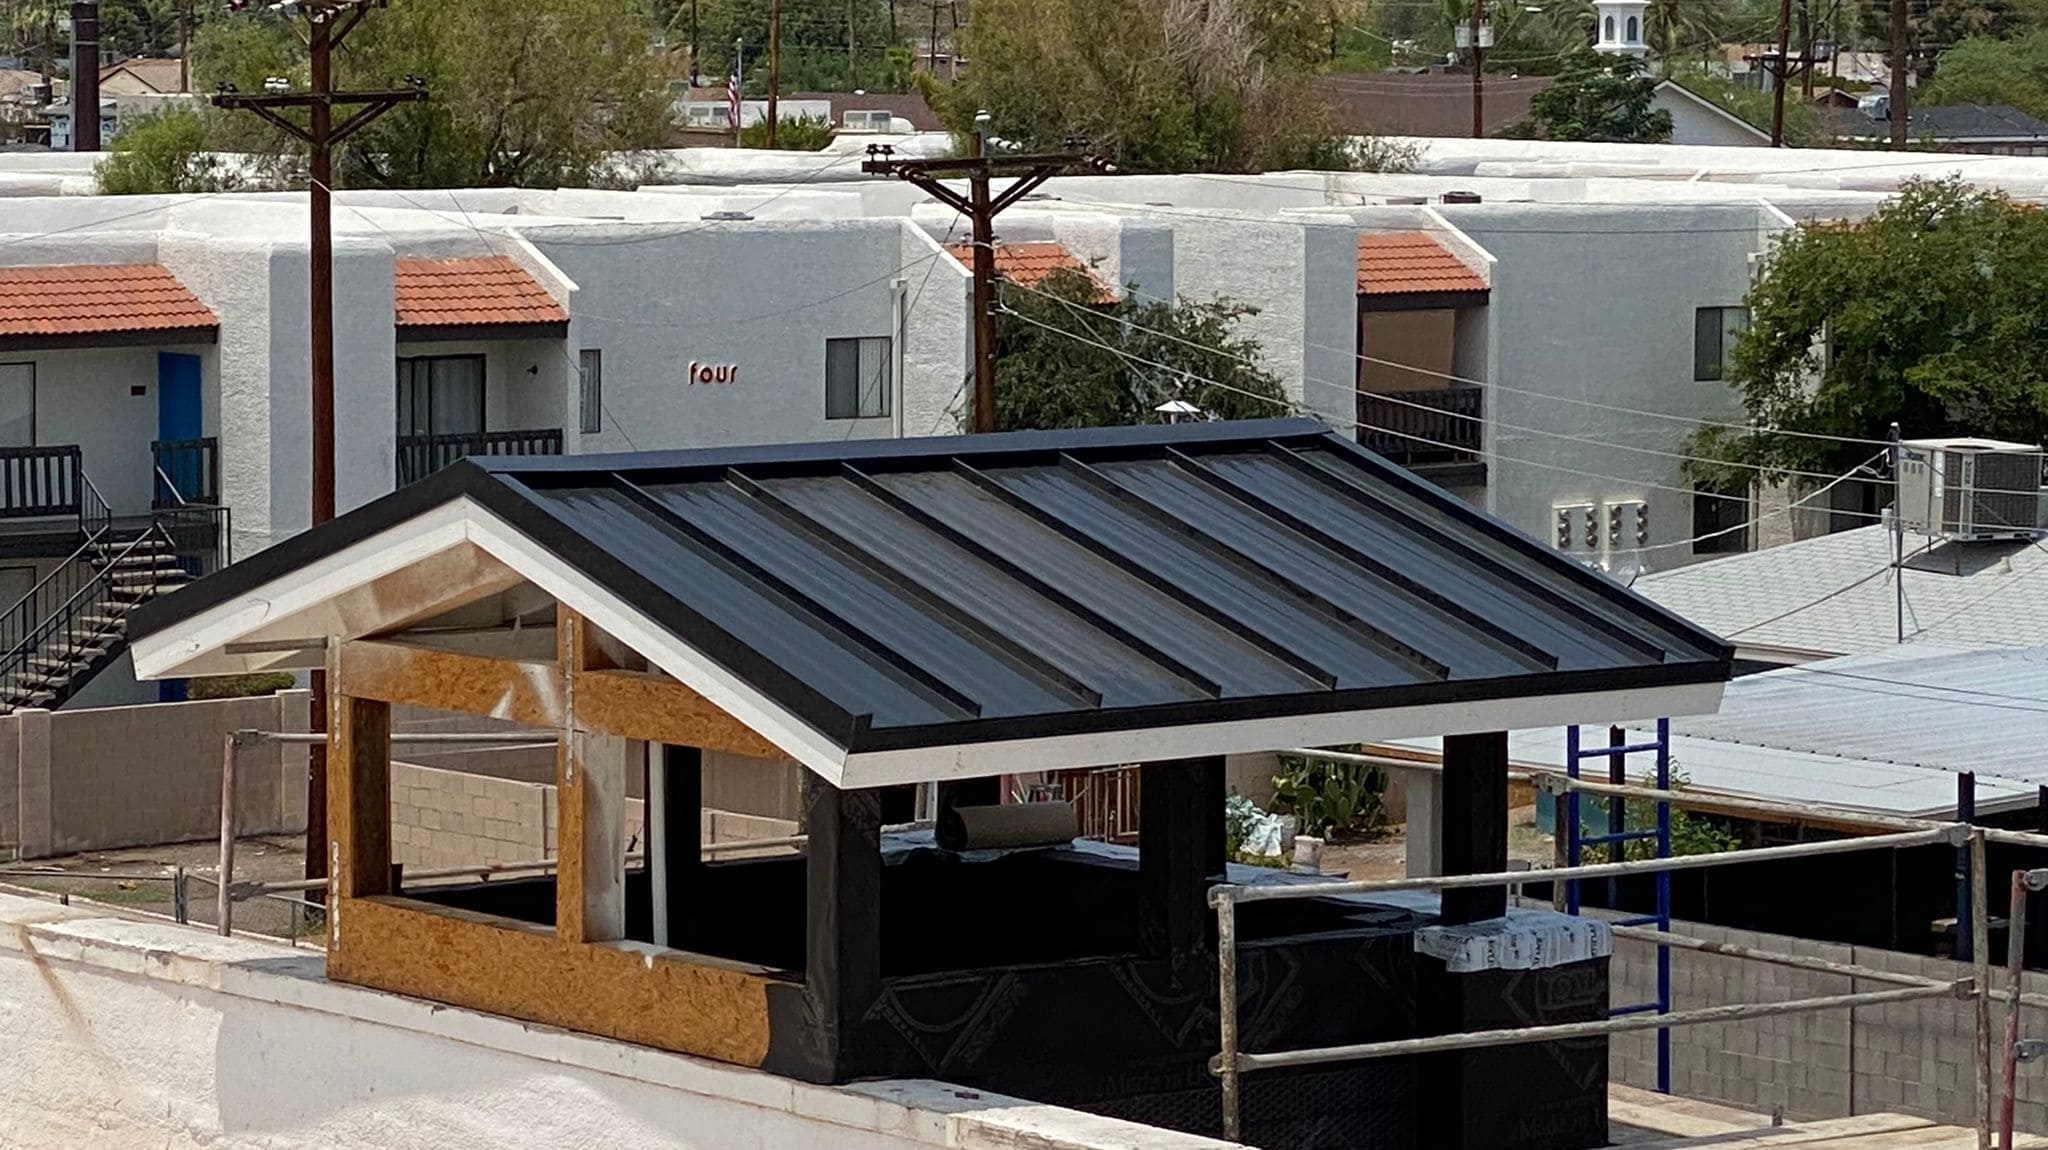 Metal roofing being installed on a building in Peoria.